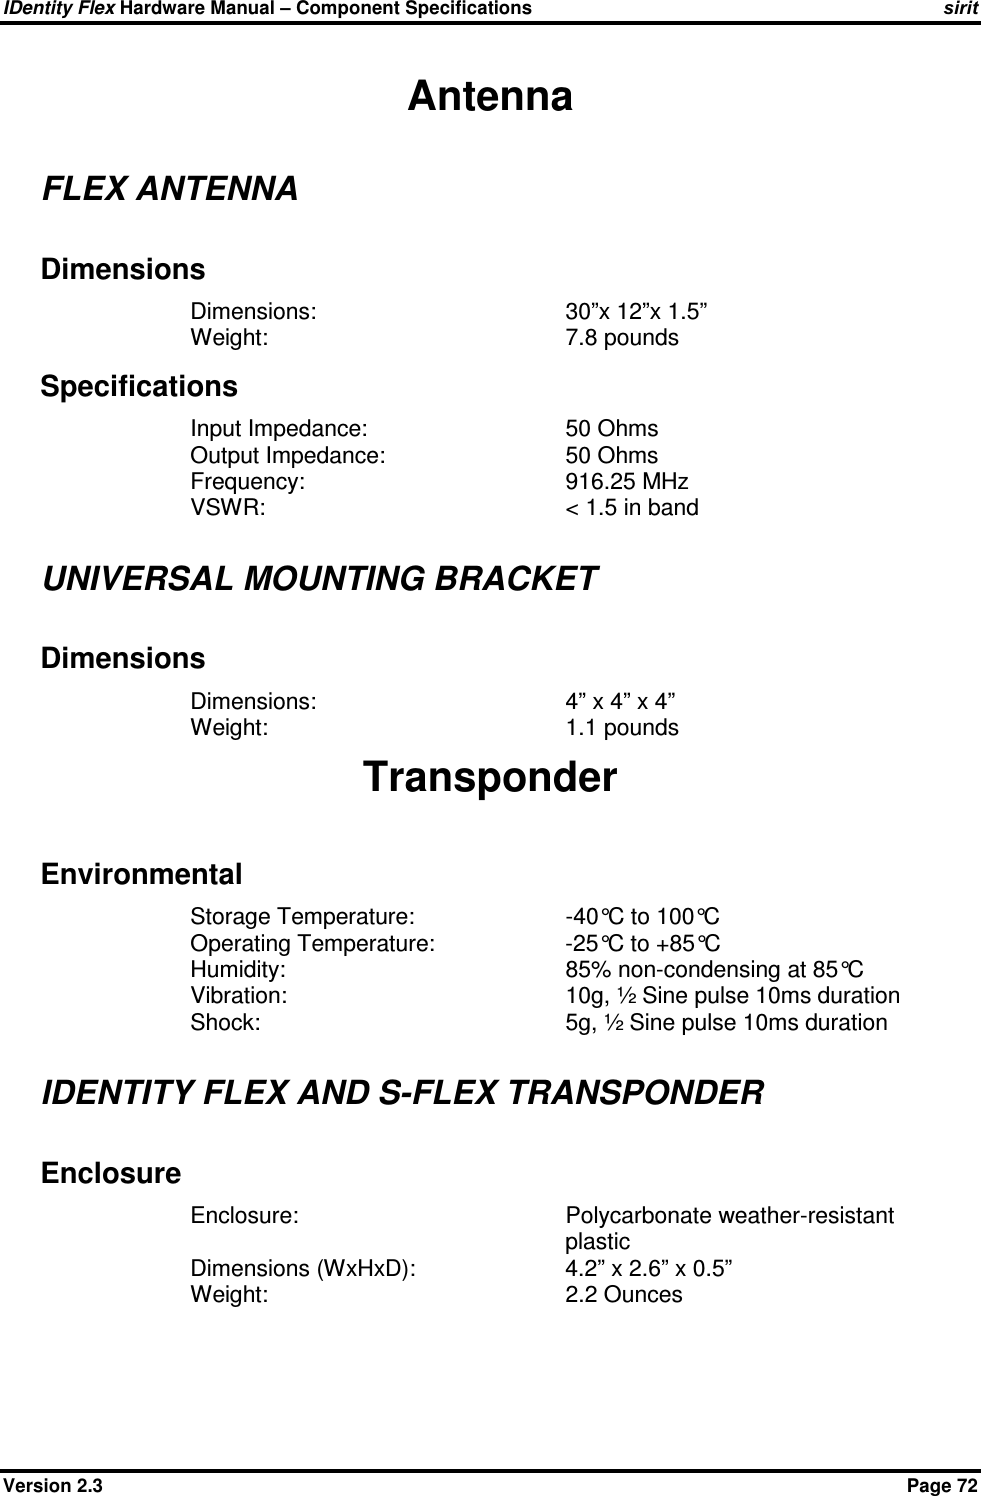 IDentity Flex Hardware Manual – Component Specifications sirit Version 2.3    Page 72 Antenna FLEX ANTENNA Dimensions Dimensions:        30”x 12”x 1.5” Weight:        7.8 pounds Specifications Input Impedance:      50 Ohms Output Impedance:      50 Ohms Frequency:        916.25 MHz VSWR:        &lt; 1.5 in band  UNIVERSAL MOUNTING BRACKET Dimensions Dimensions:        4” x 4” x 4” Weight:        1.1 pounds Transponder Environmental Storage Temperature:     -40°C to 100°C Operating Temperature:    -25°C to +85°C Humidity:        85% non-condensing at 85°C Vibration:        10g, ½ Sine pulse 10ms duration Shock:         5g, ½ Sine pulse 10ms duration  IDENTITY FLEX AND S-FLEX TRANSPONDER Enclosure Enclosure:  Polycarbonate weather-resistant plastic Dimensions (WxHxD):    4.2” x 2.6” x 0.5” Weight:        2.2 Ounces 